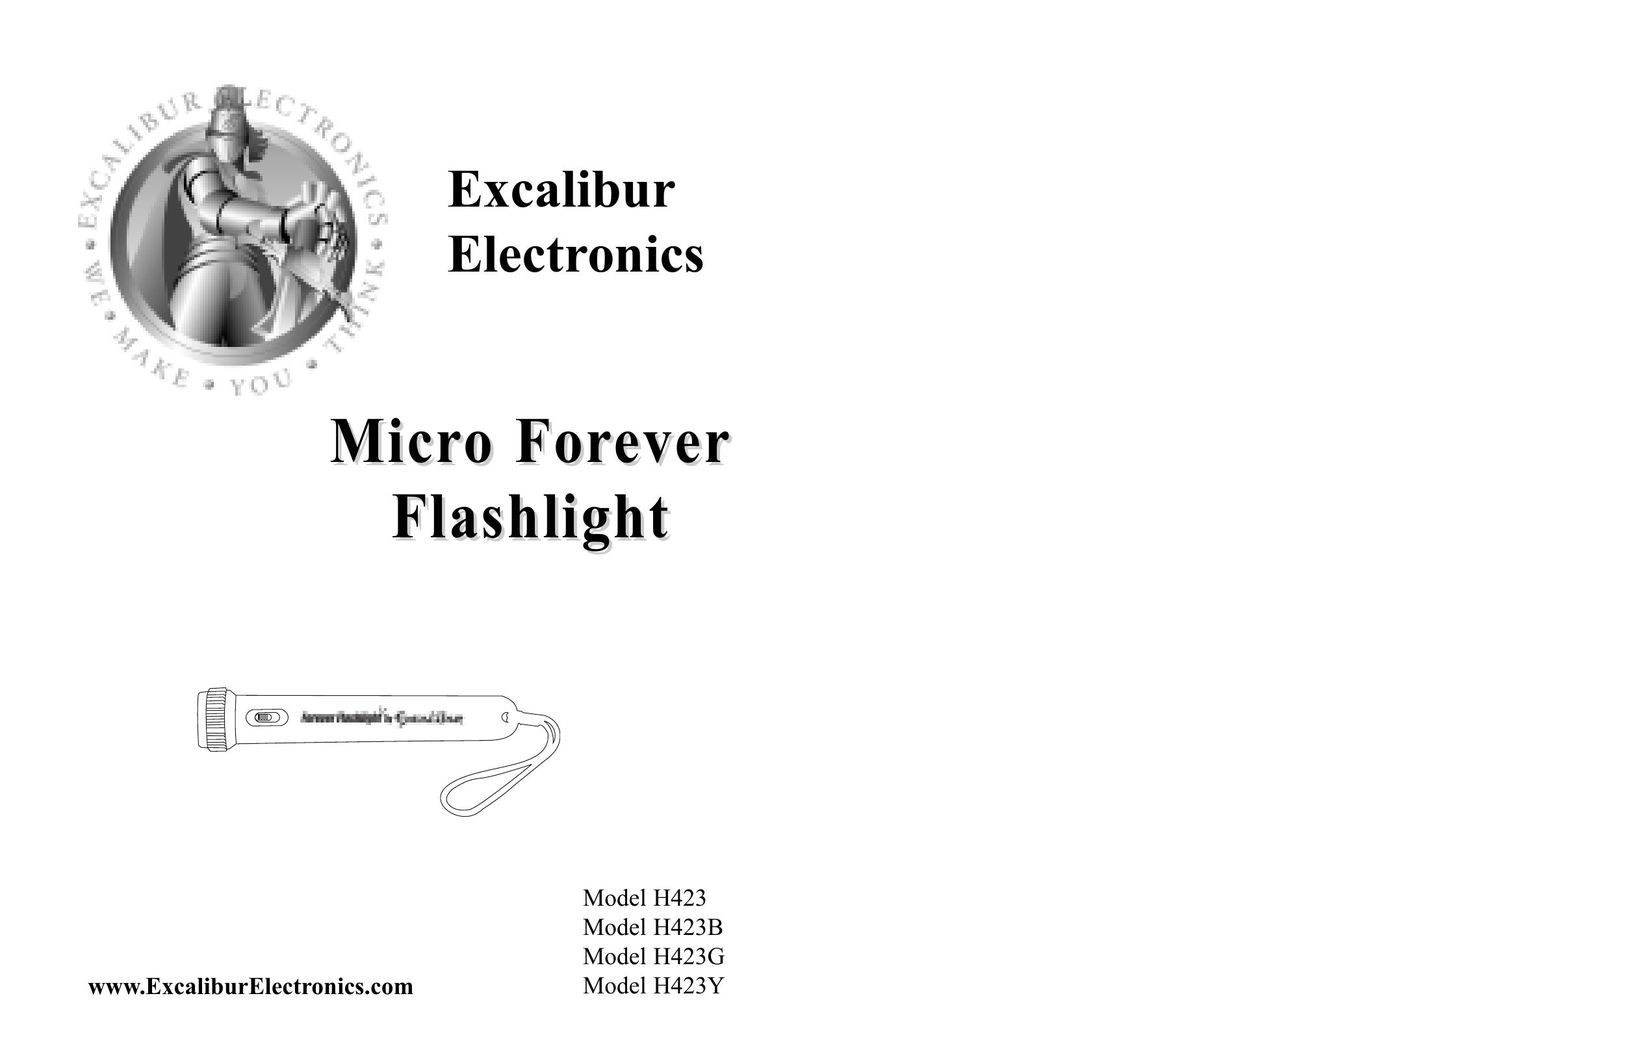 Excalibur electronic H423G Home Safety Product User Manual